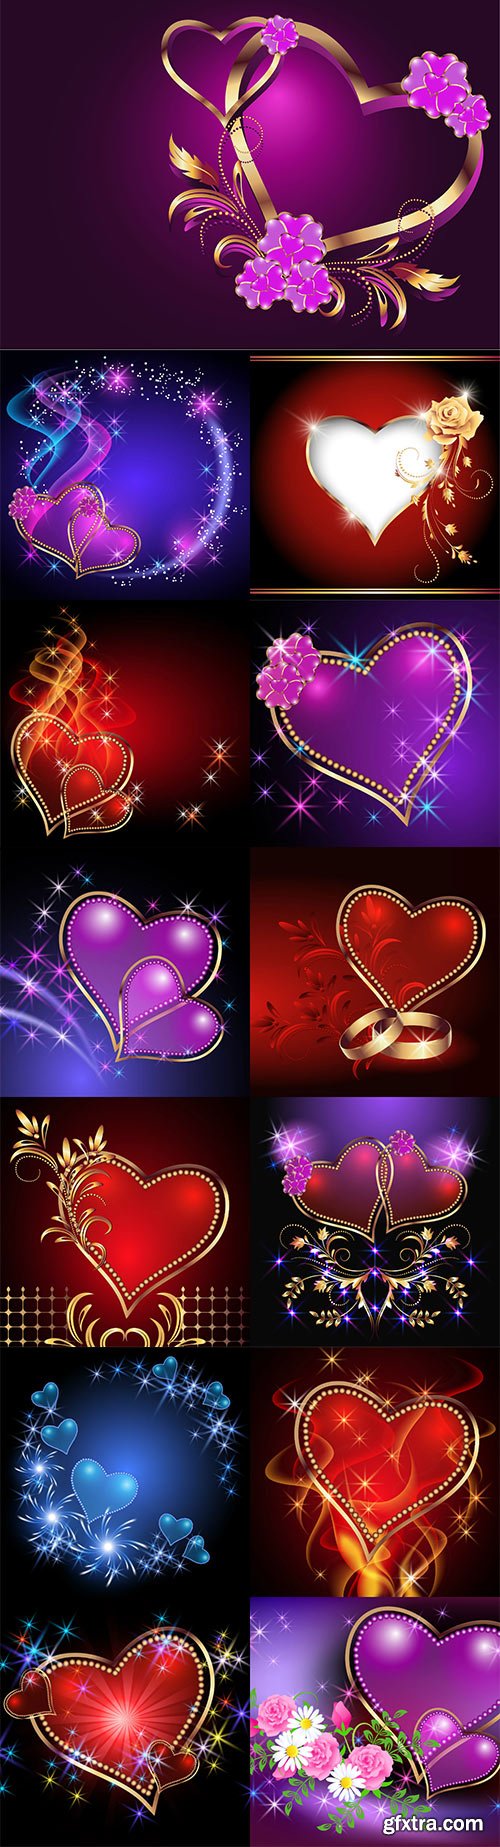 Romantic backgrounds for Valentine